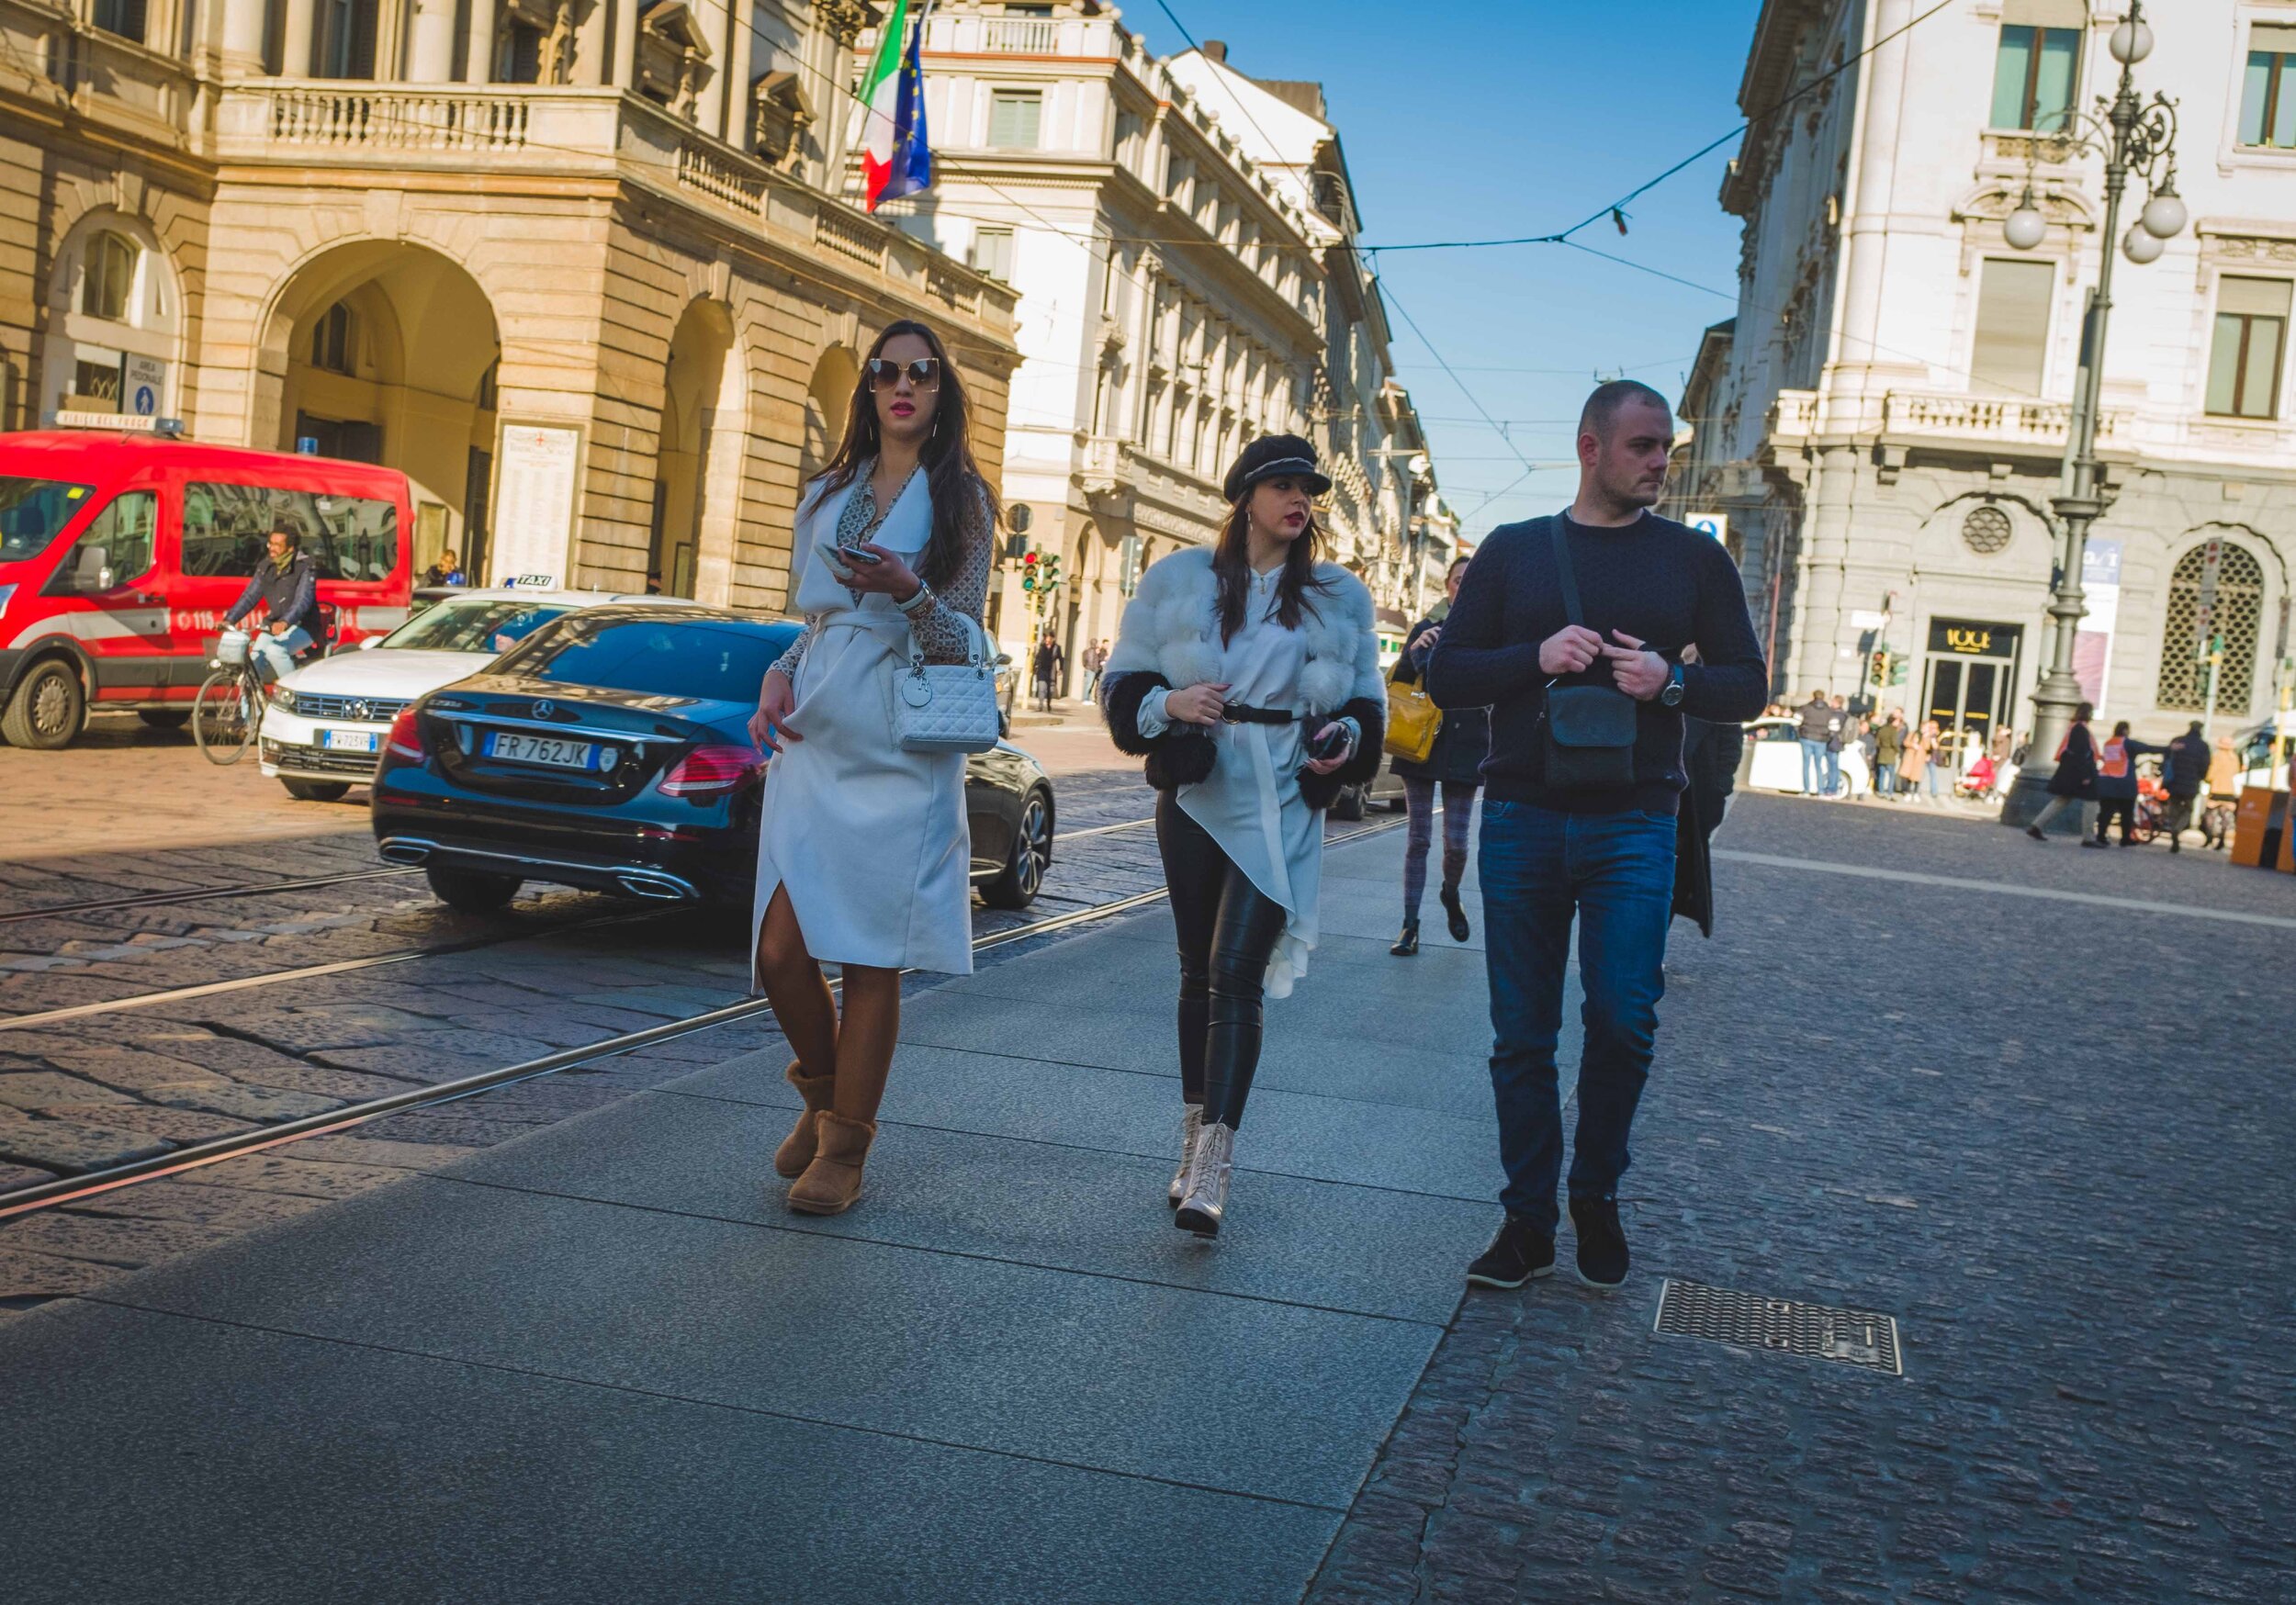 Paul Mullins Photography - Street Photography 2020 Turin and Milan